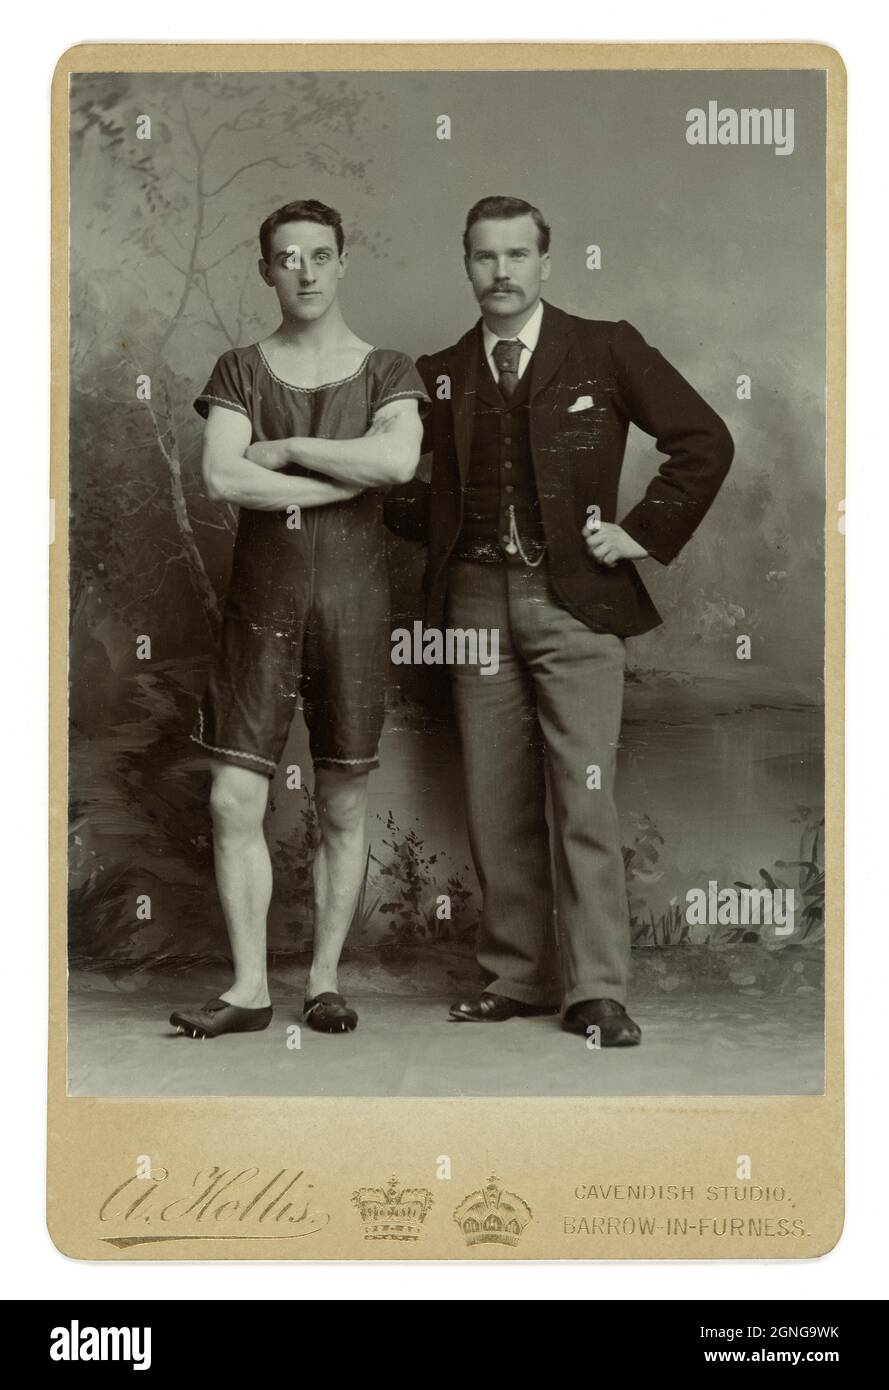 Original very sharp and clear image from the Edwardian era. This is a superb cabinet card photograph of an unknown young athlete or sprinter wearing track spikes with his smartly dressed, handsome trainer by Arthur Hollis from his Cavendish Studio, Barrow-in-Furness, North West England, Cumbria, England, U.K. circa 1903 Stock Photo